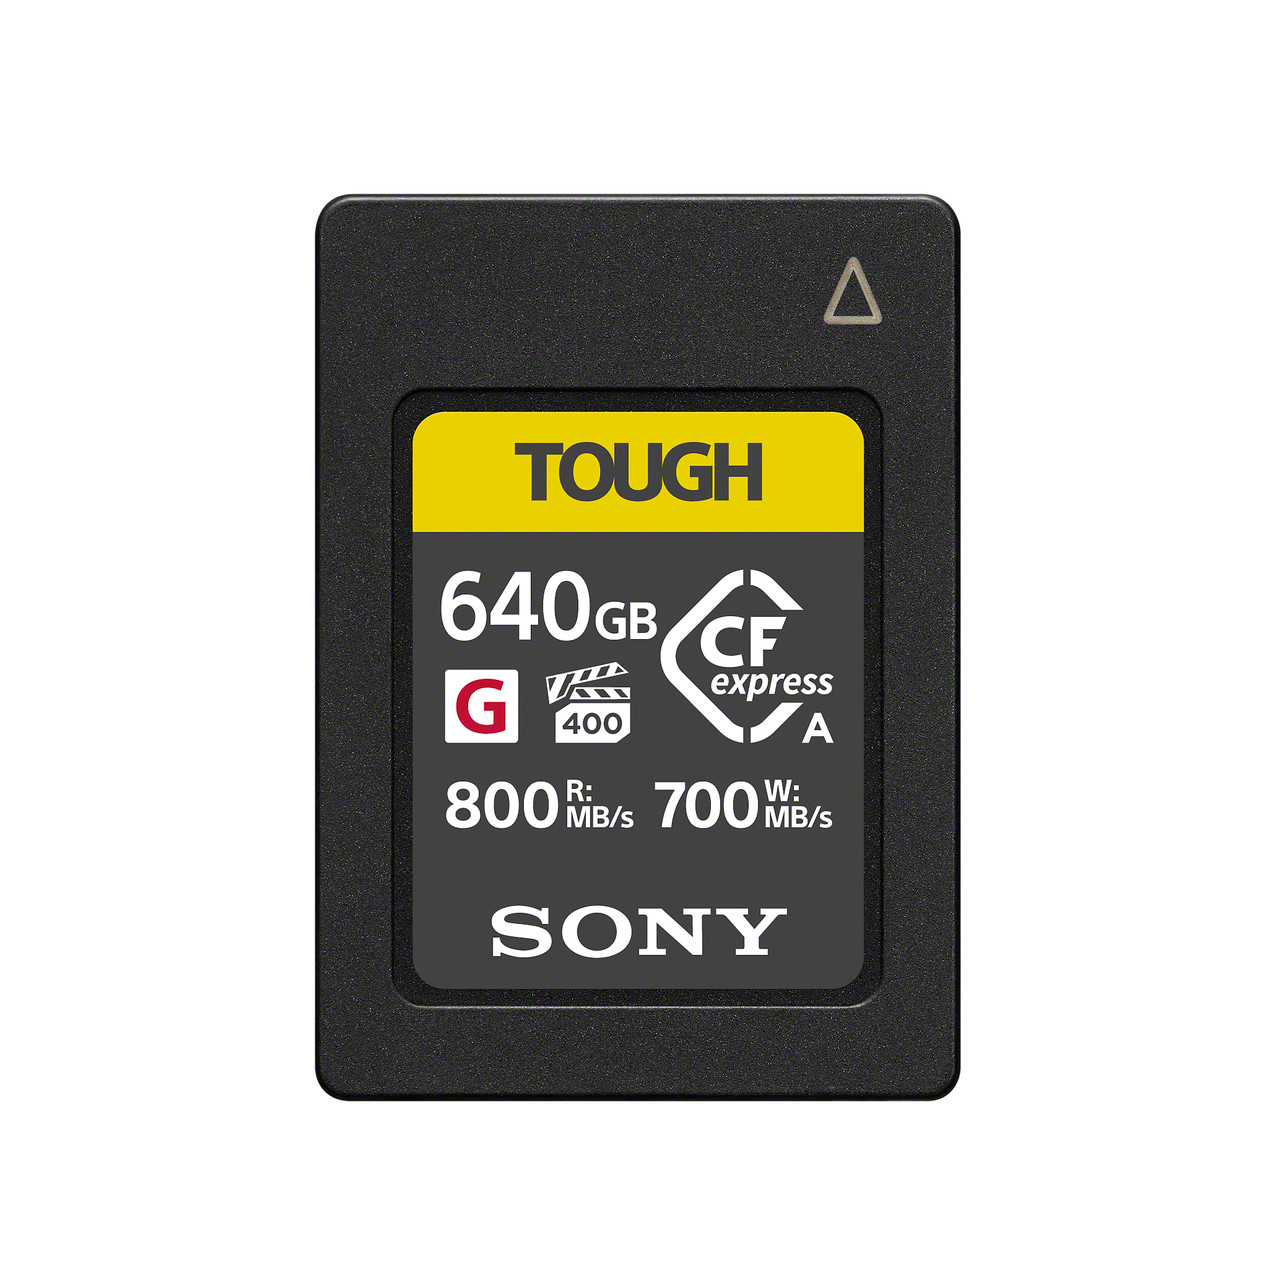 SONY CFEXPRESS TYPE A (640GB)